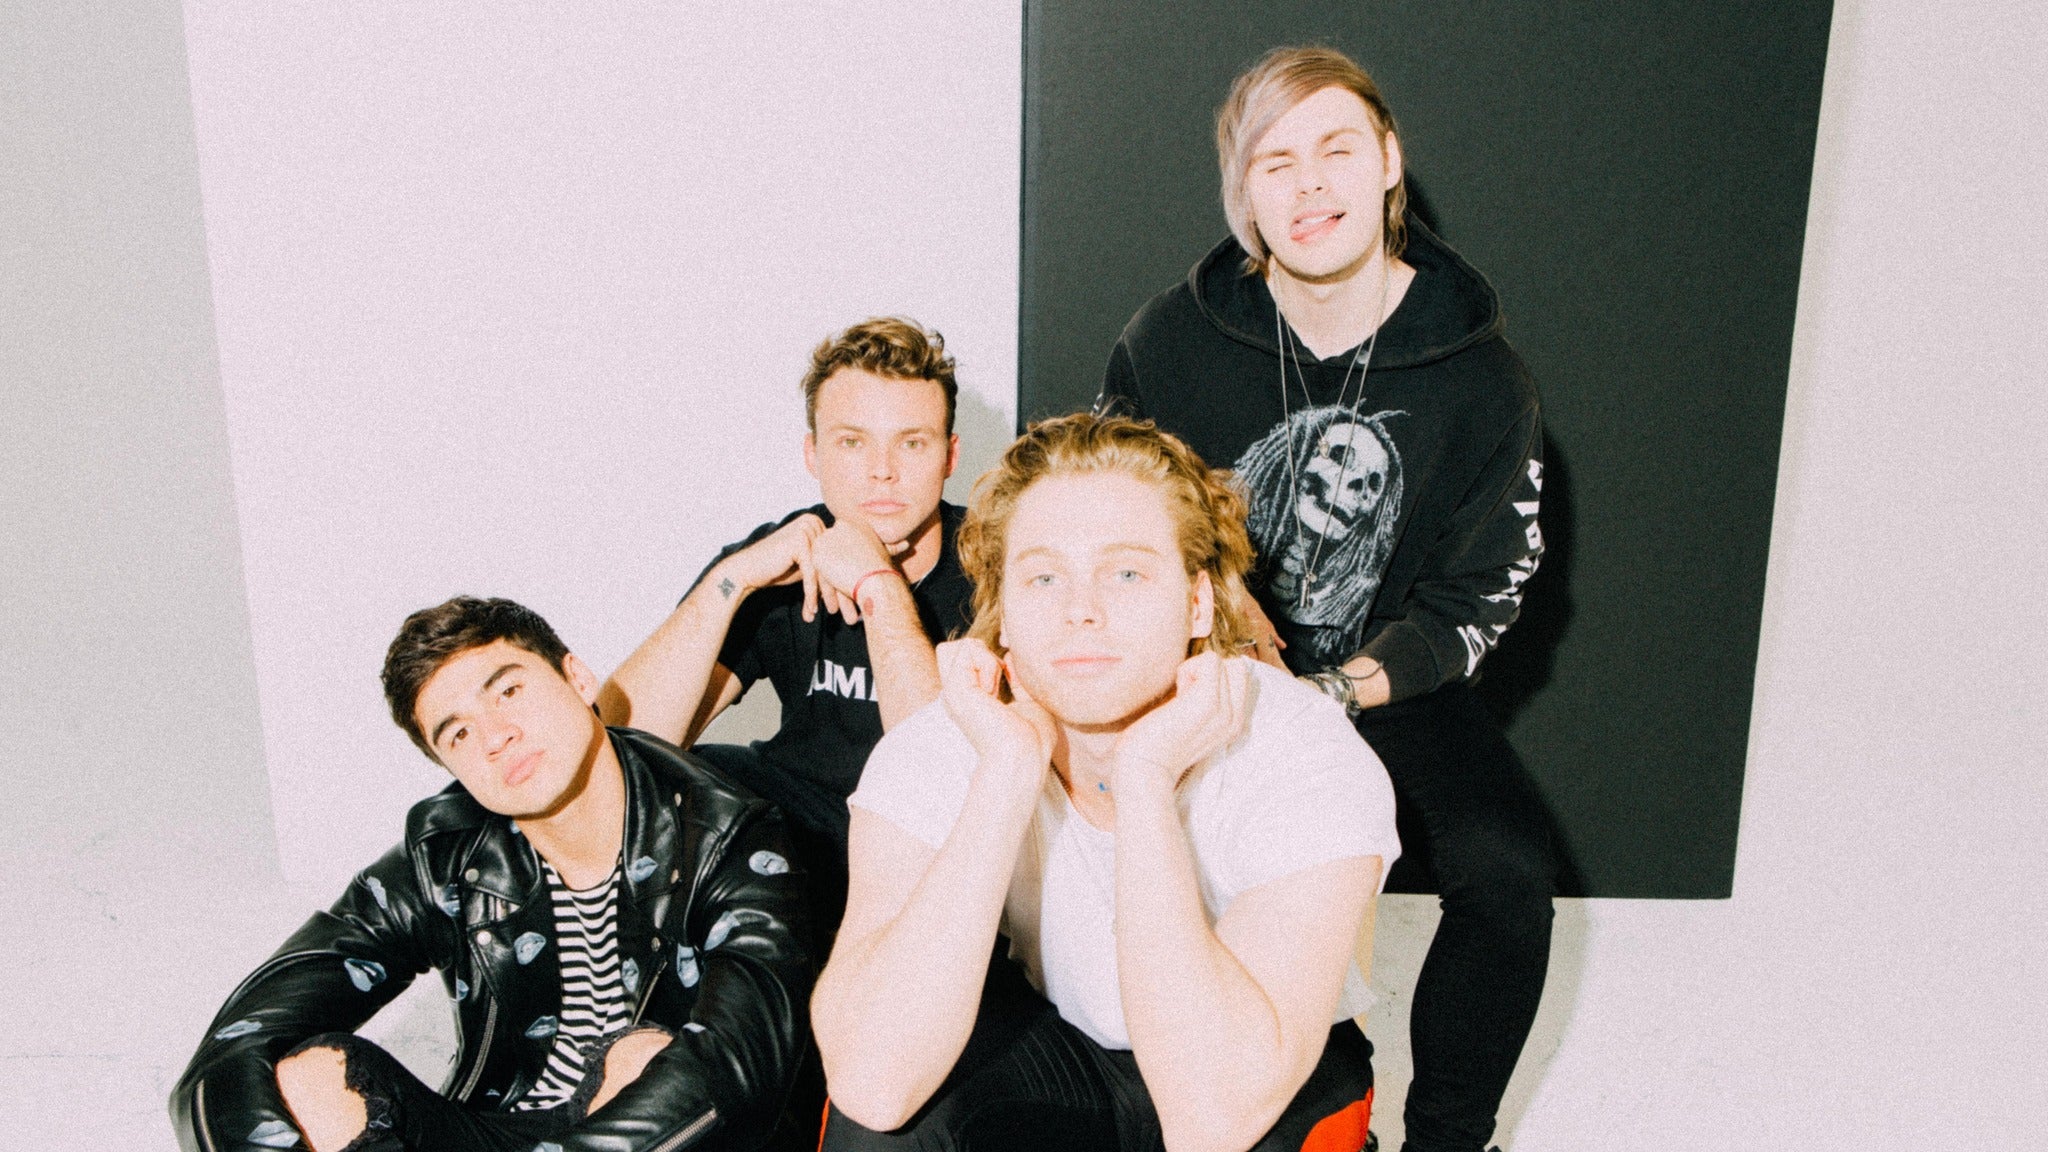 5 Seconds of Summer: Meet You There Tour in Orlando promo photo for Official Platinum presale offer code